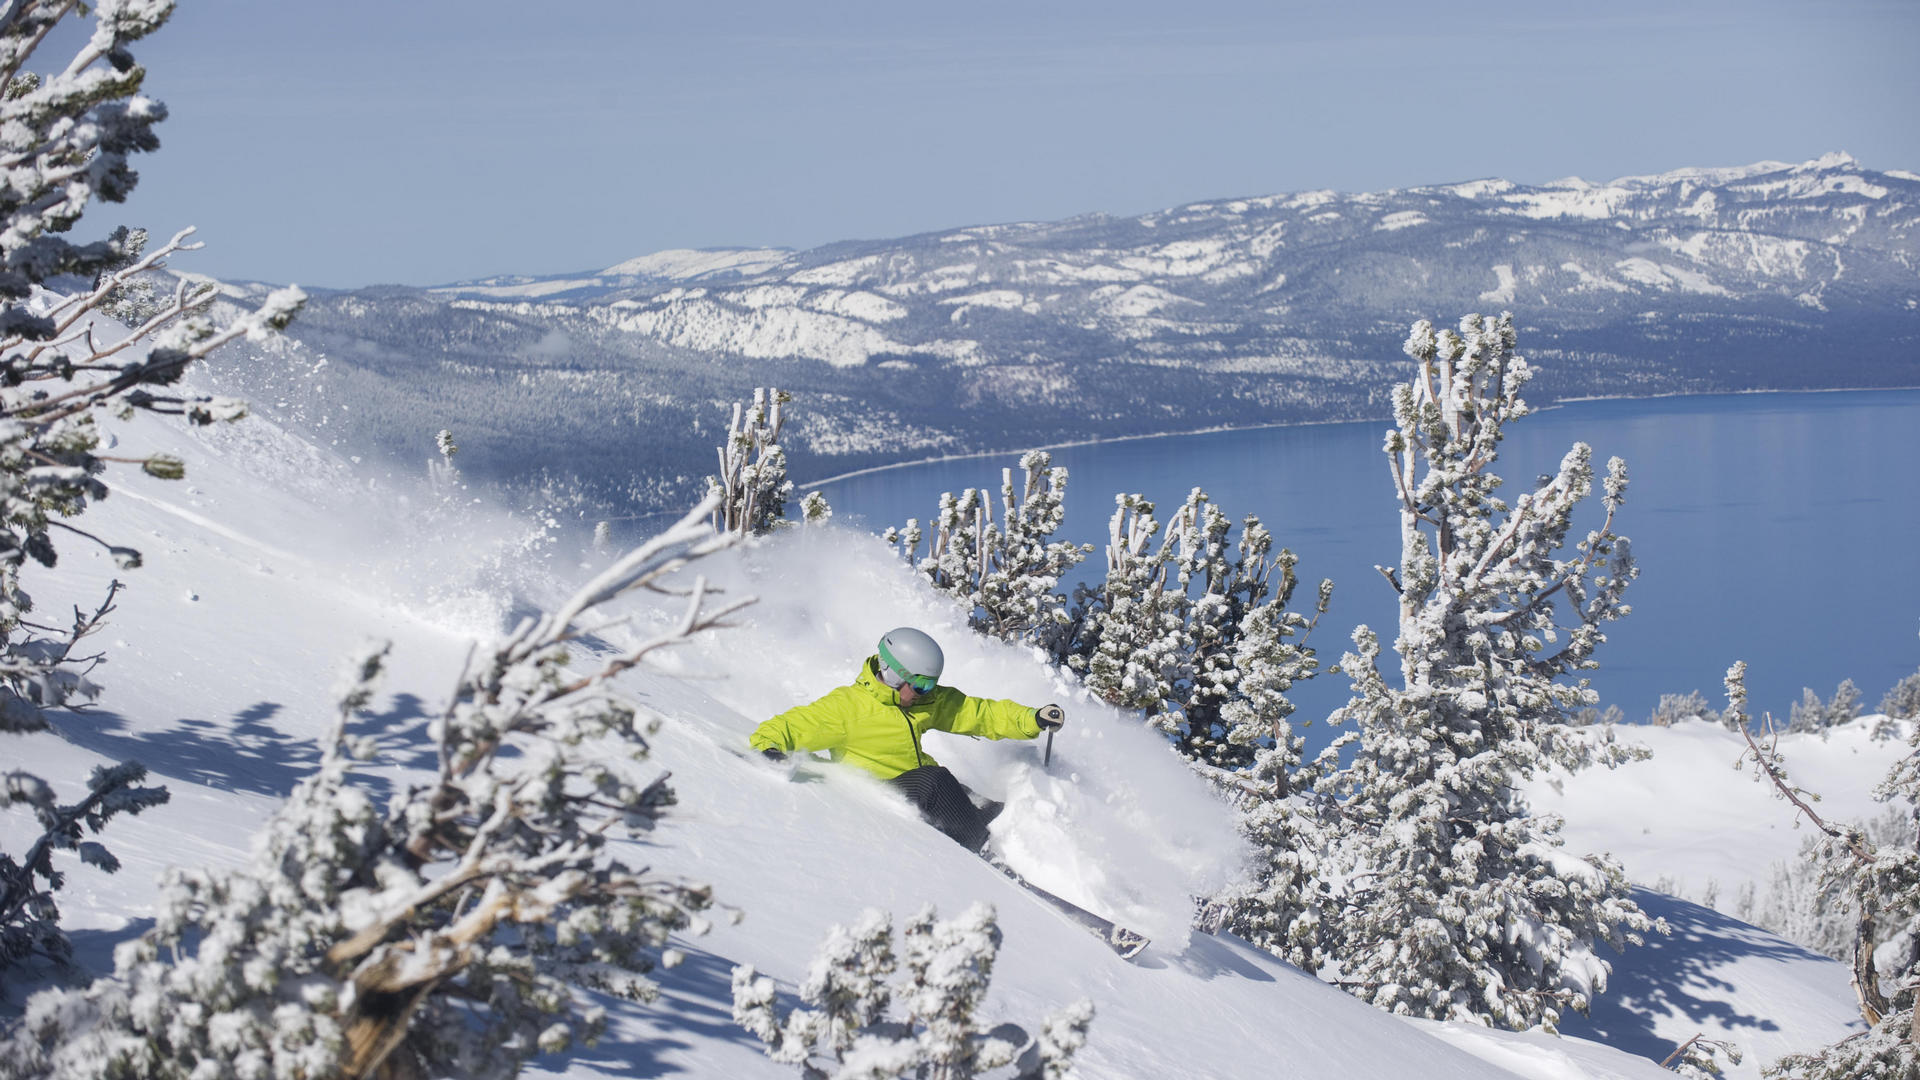 South Lake Tahoe Winter Activities. Forest Suites Resort